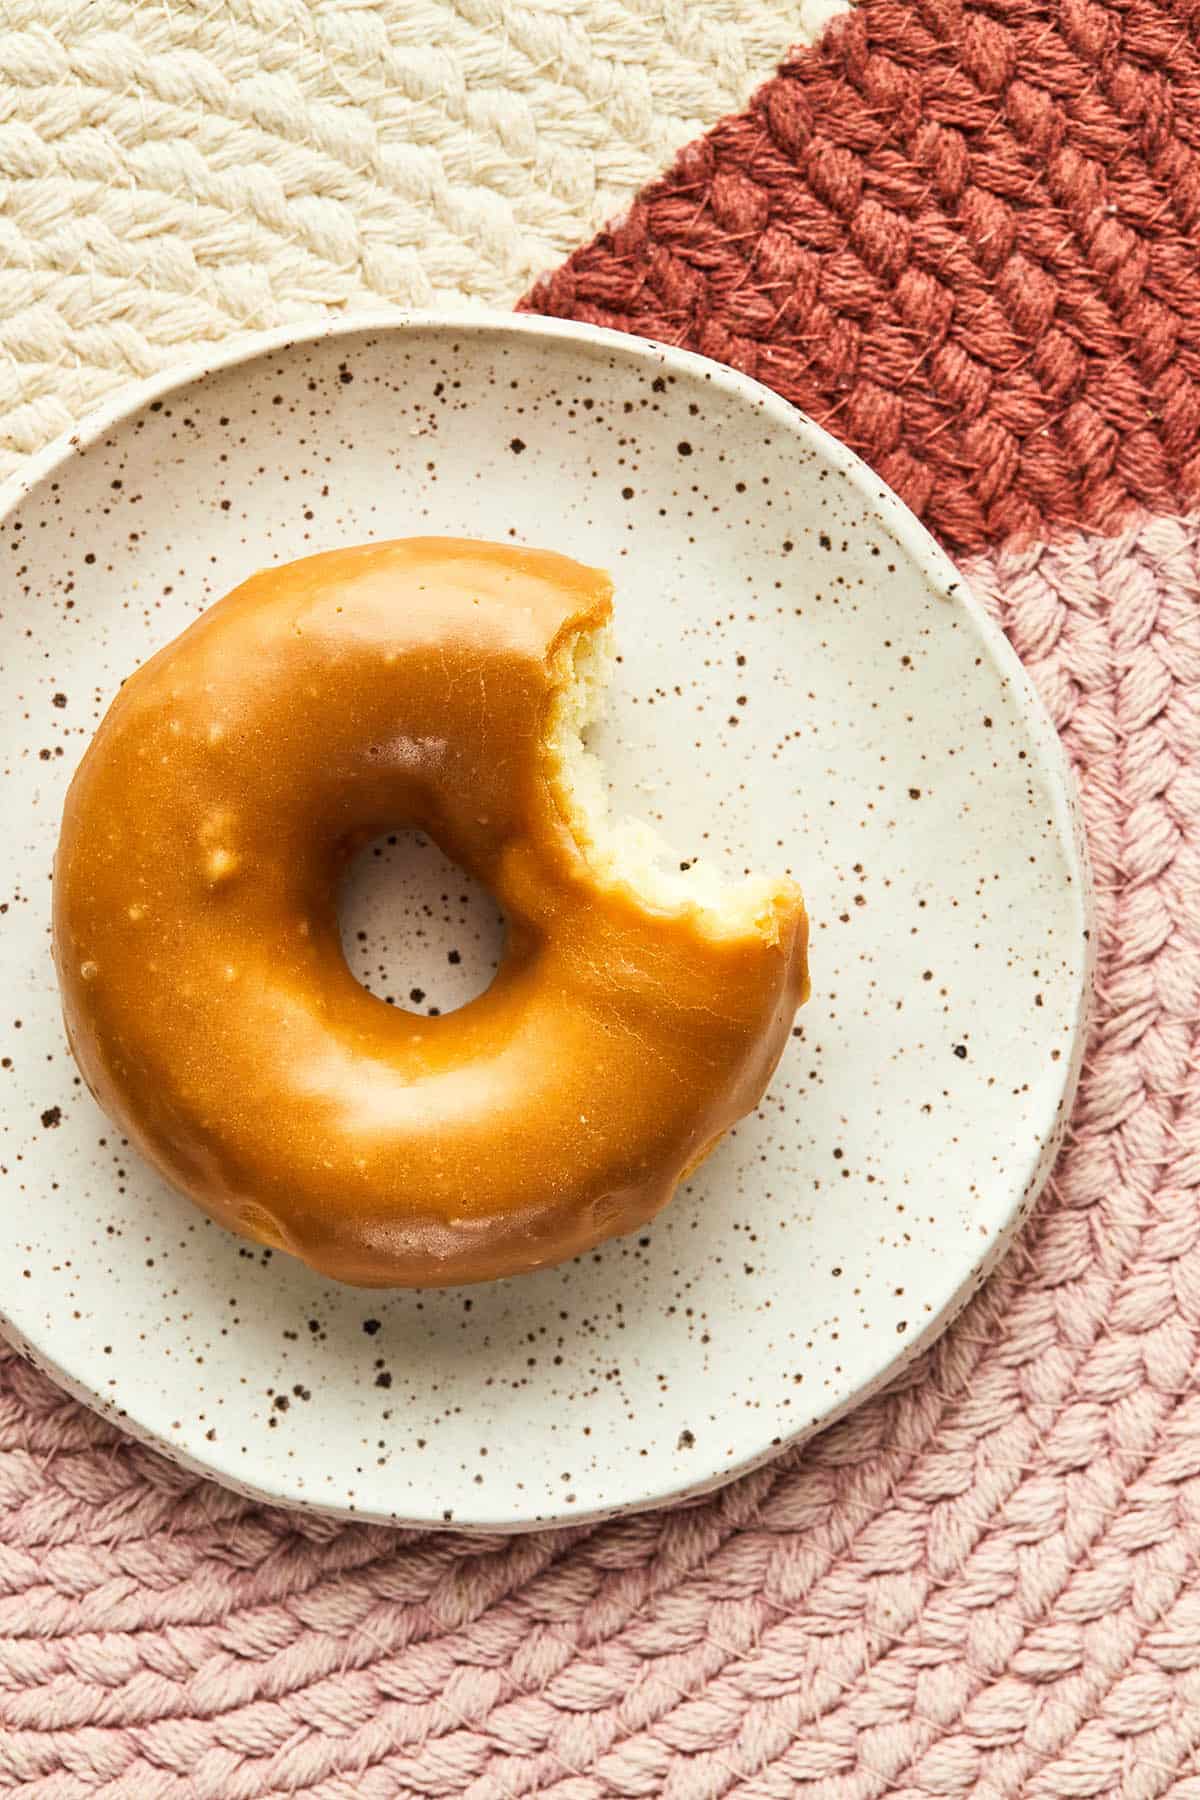 A single glazed donut on a small plate with a bite taken out of it.